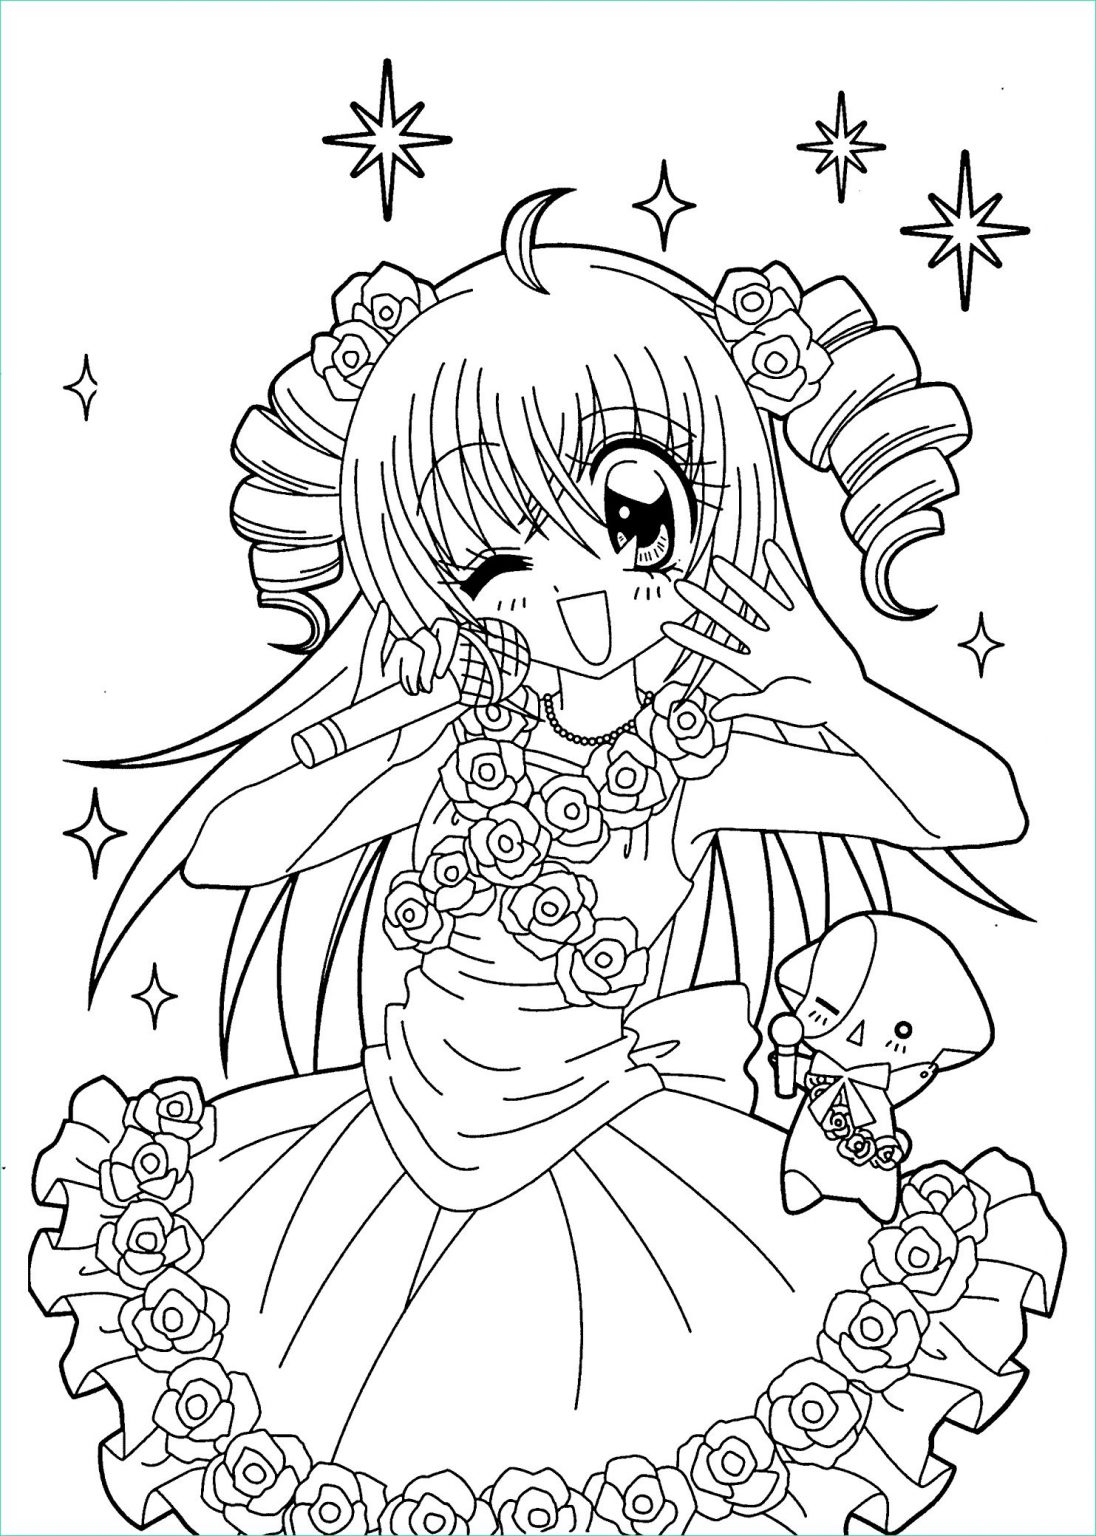 Manga A Colorier Beau Collection Free Printable Anime Coloring Pages ...